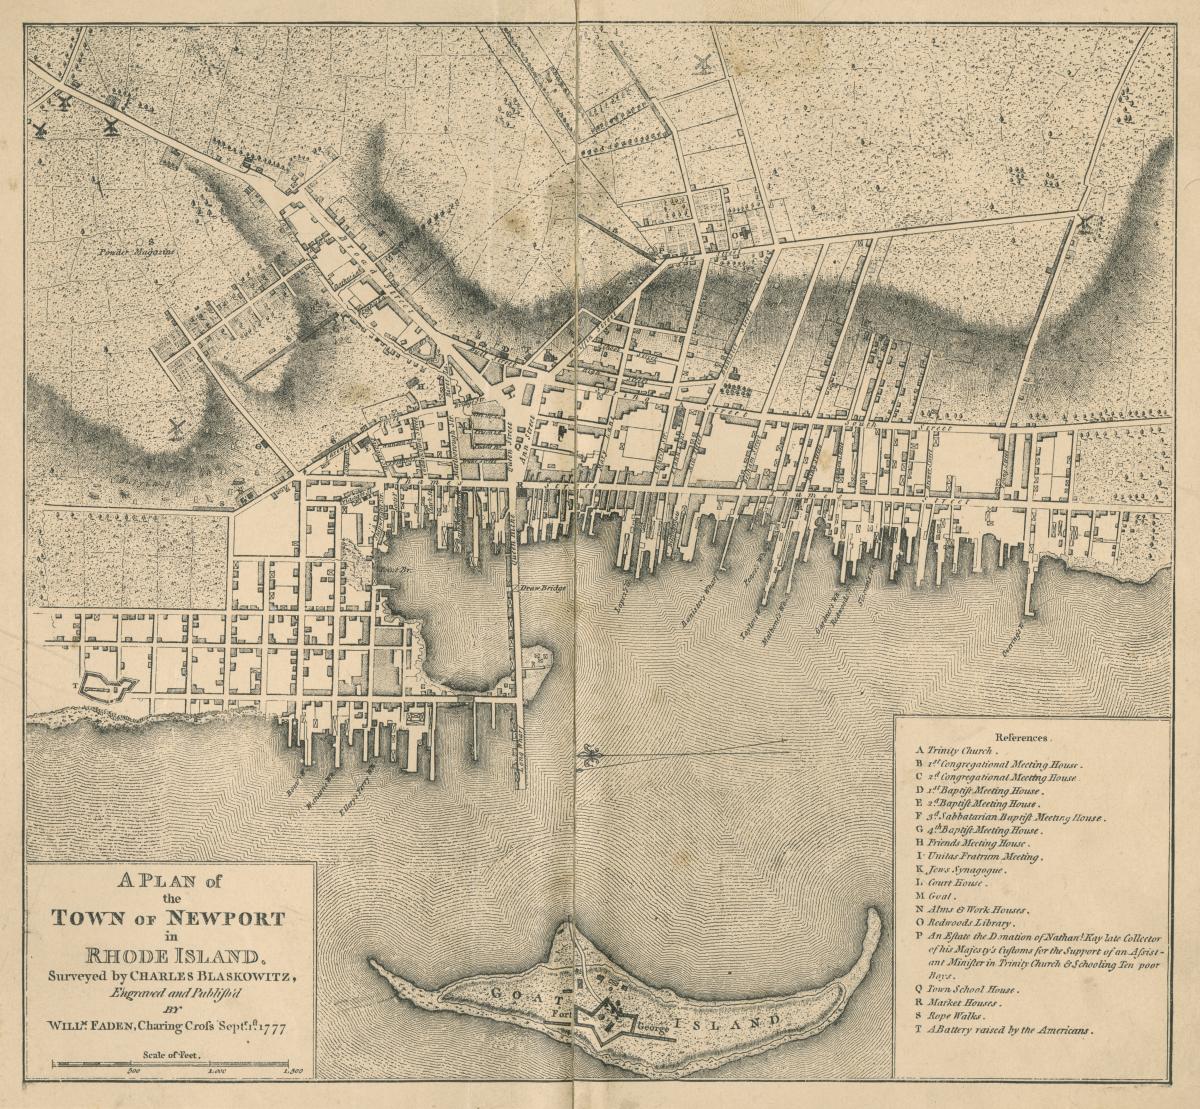 A Plan of the Town of Newport in Rhode Island (1777) shows the city when John A. Howe first arrived there and the British occupied it. 